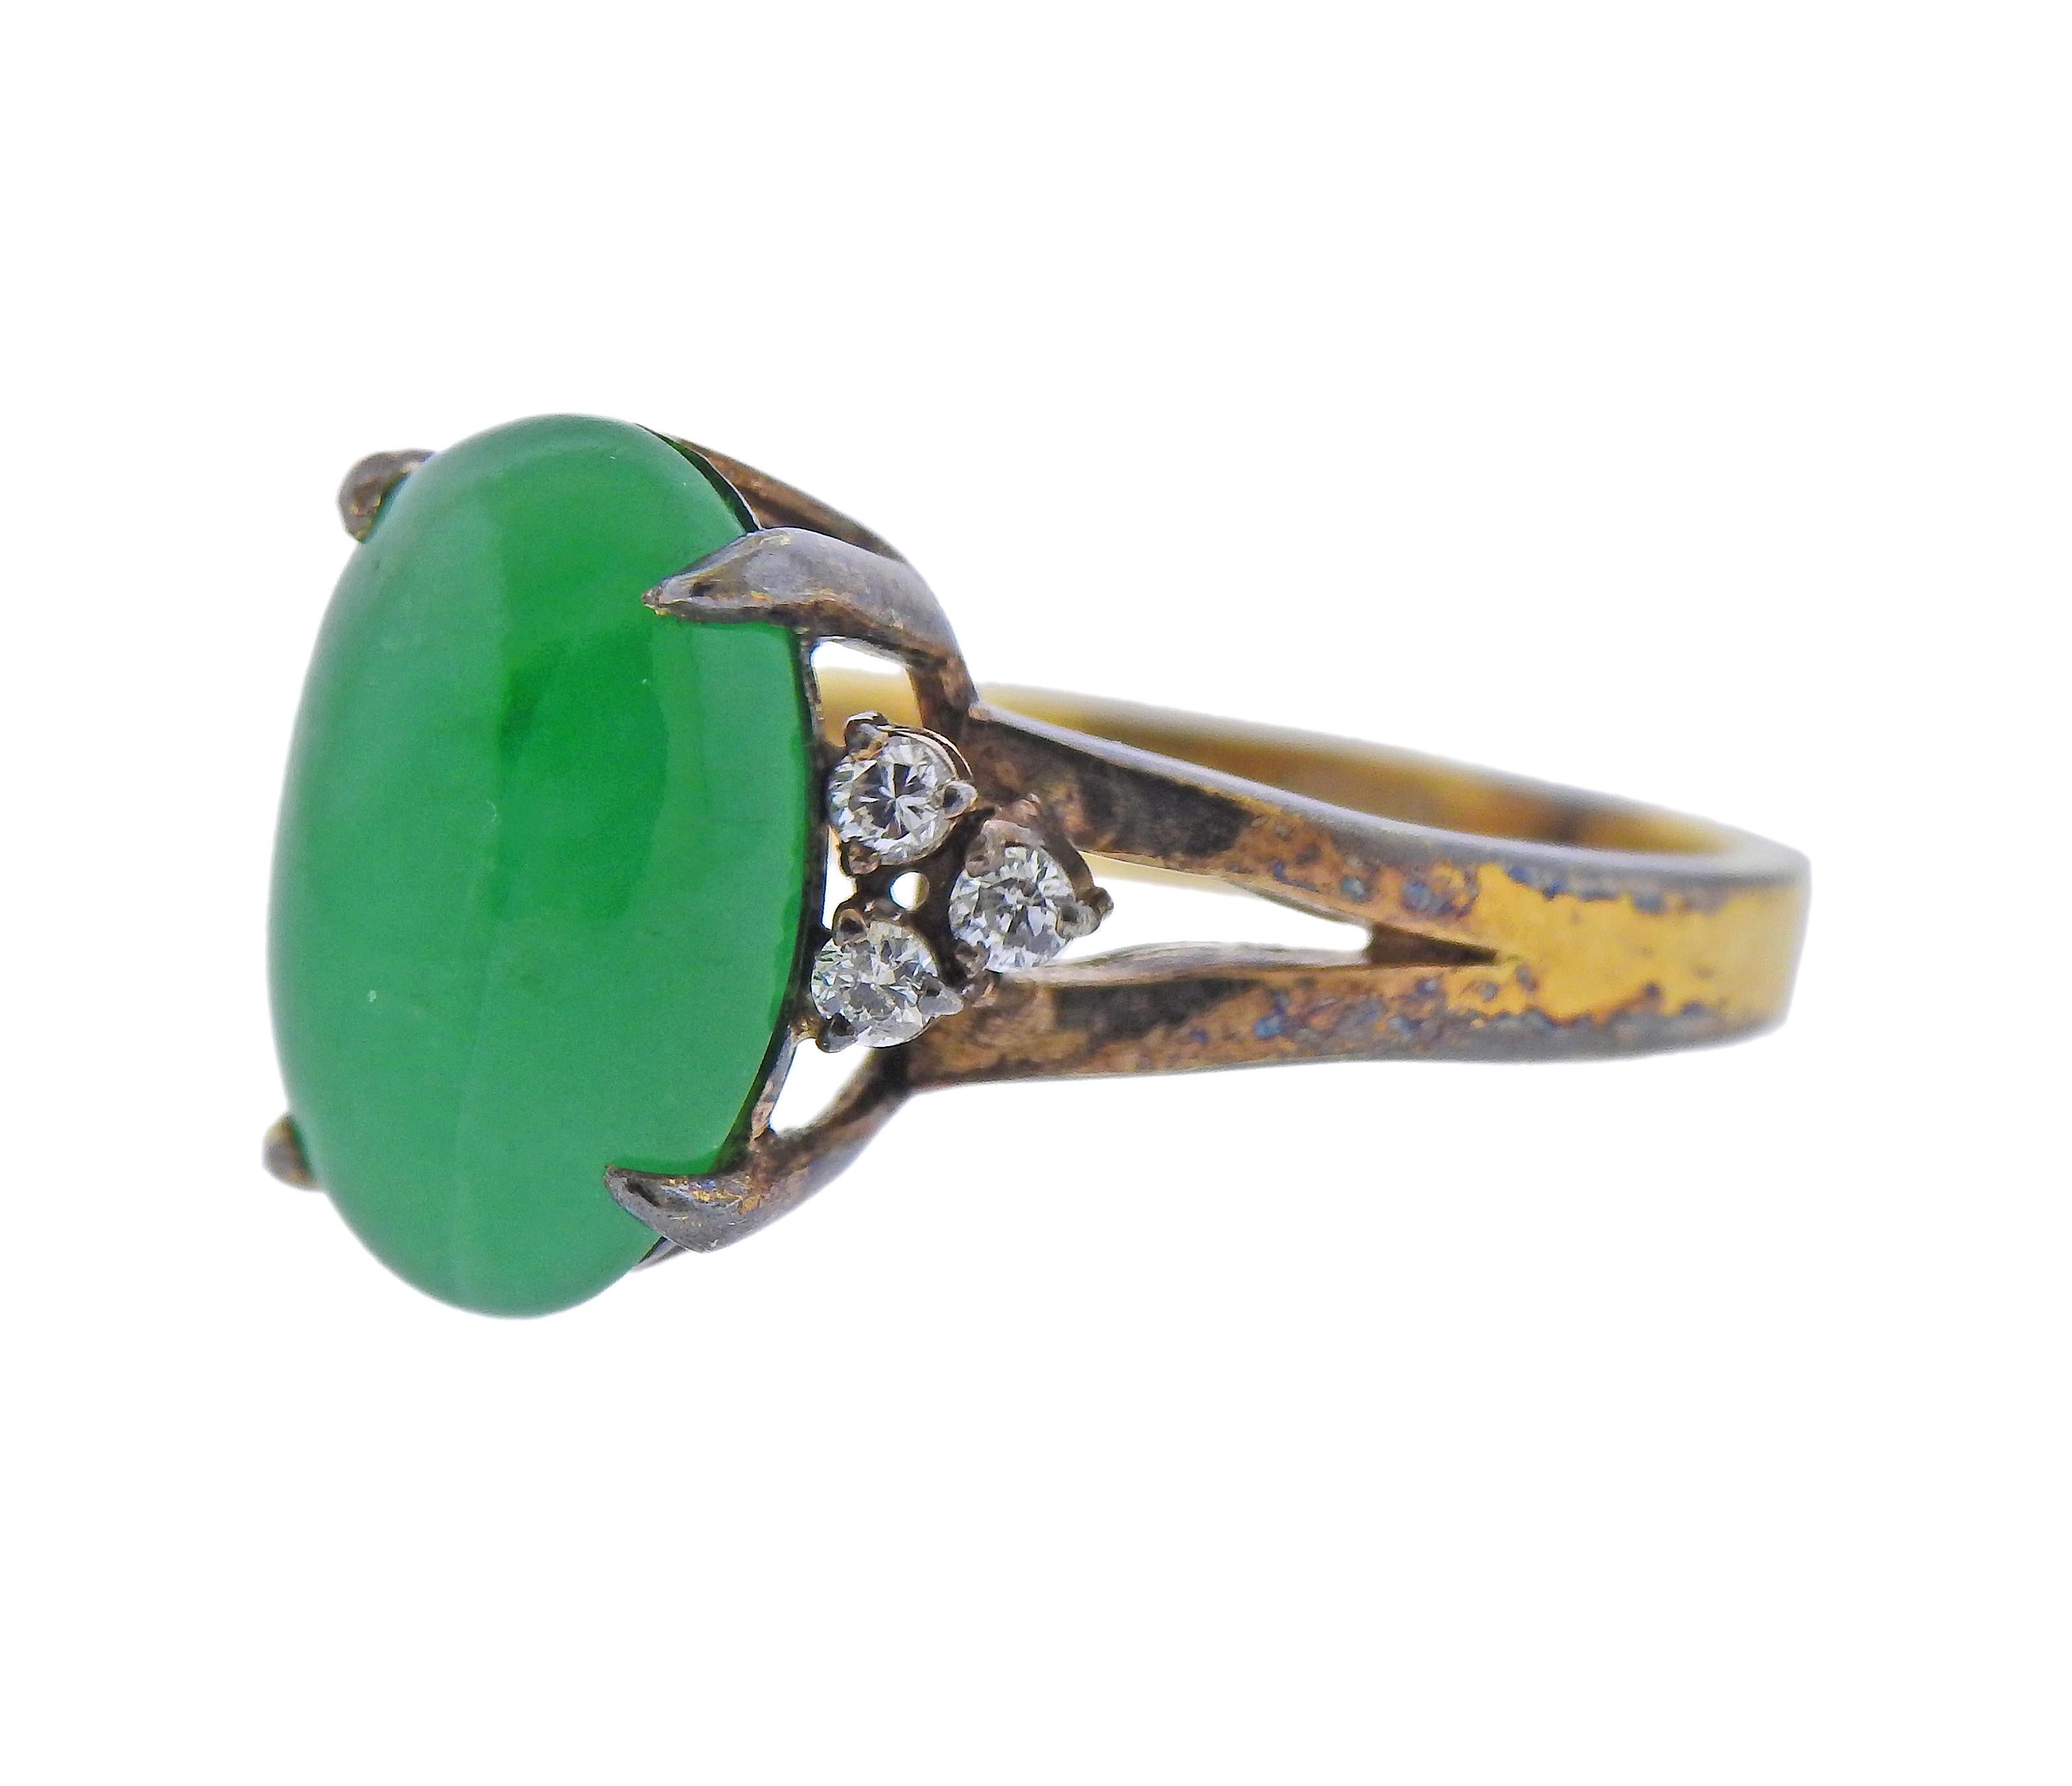 14k gold ring, set with a natural color type A Fei Cui (jade) , measuring approx. 21.61 x 8.51 x 4.17mm, surrounded with 6 side diamonds. Ring size - 5.5. Marked 585. Weight - 4.3 grams.